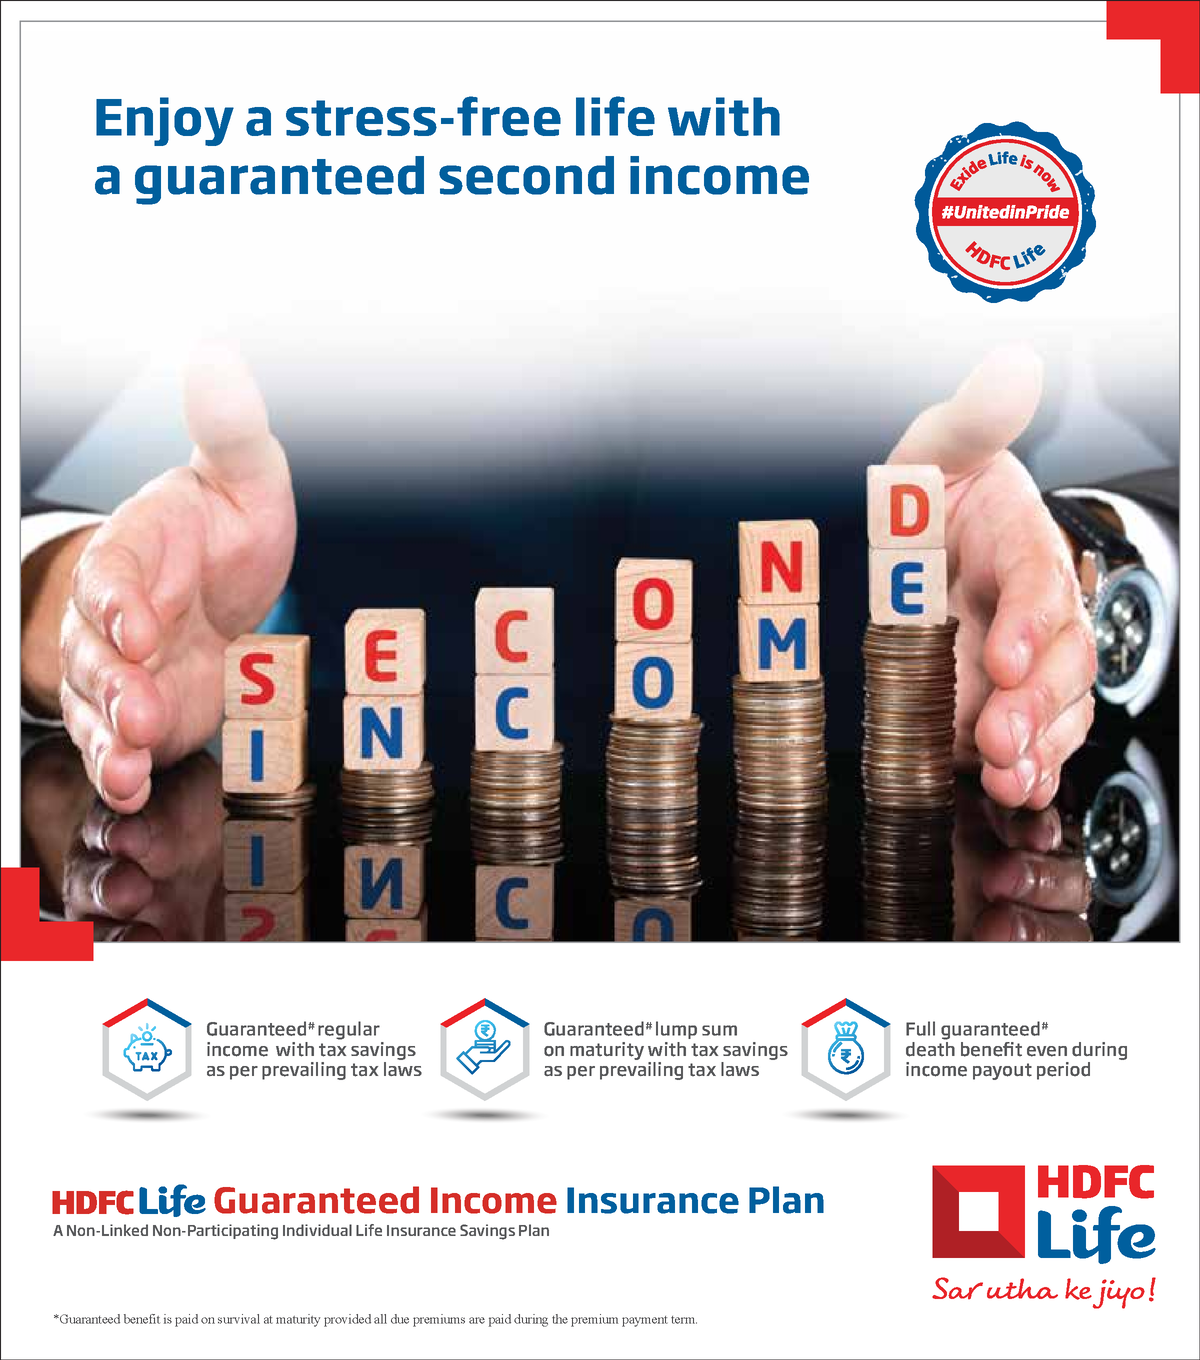 HDFC LIFE GIIP Brochure *Guaranteed benefit is paid on survival at